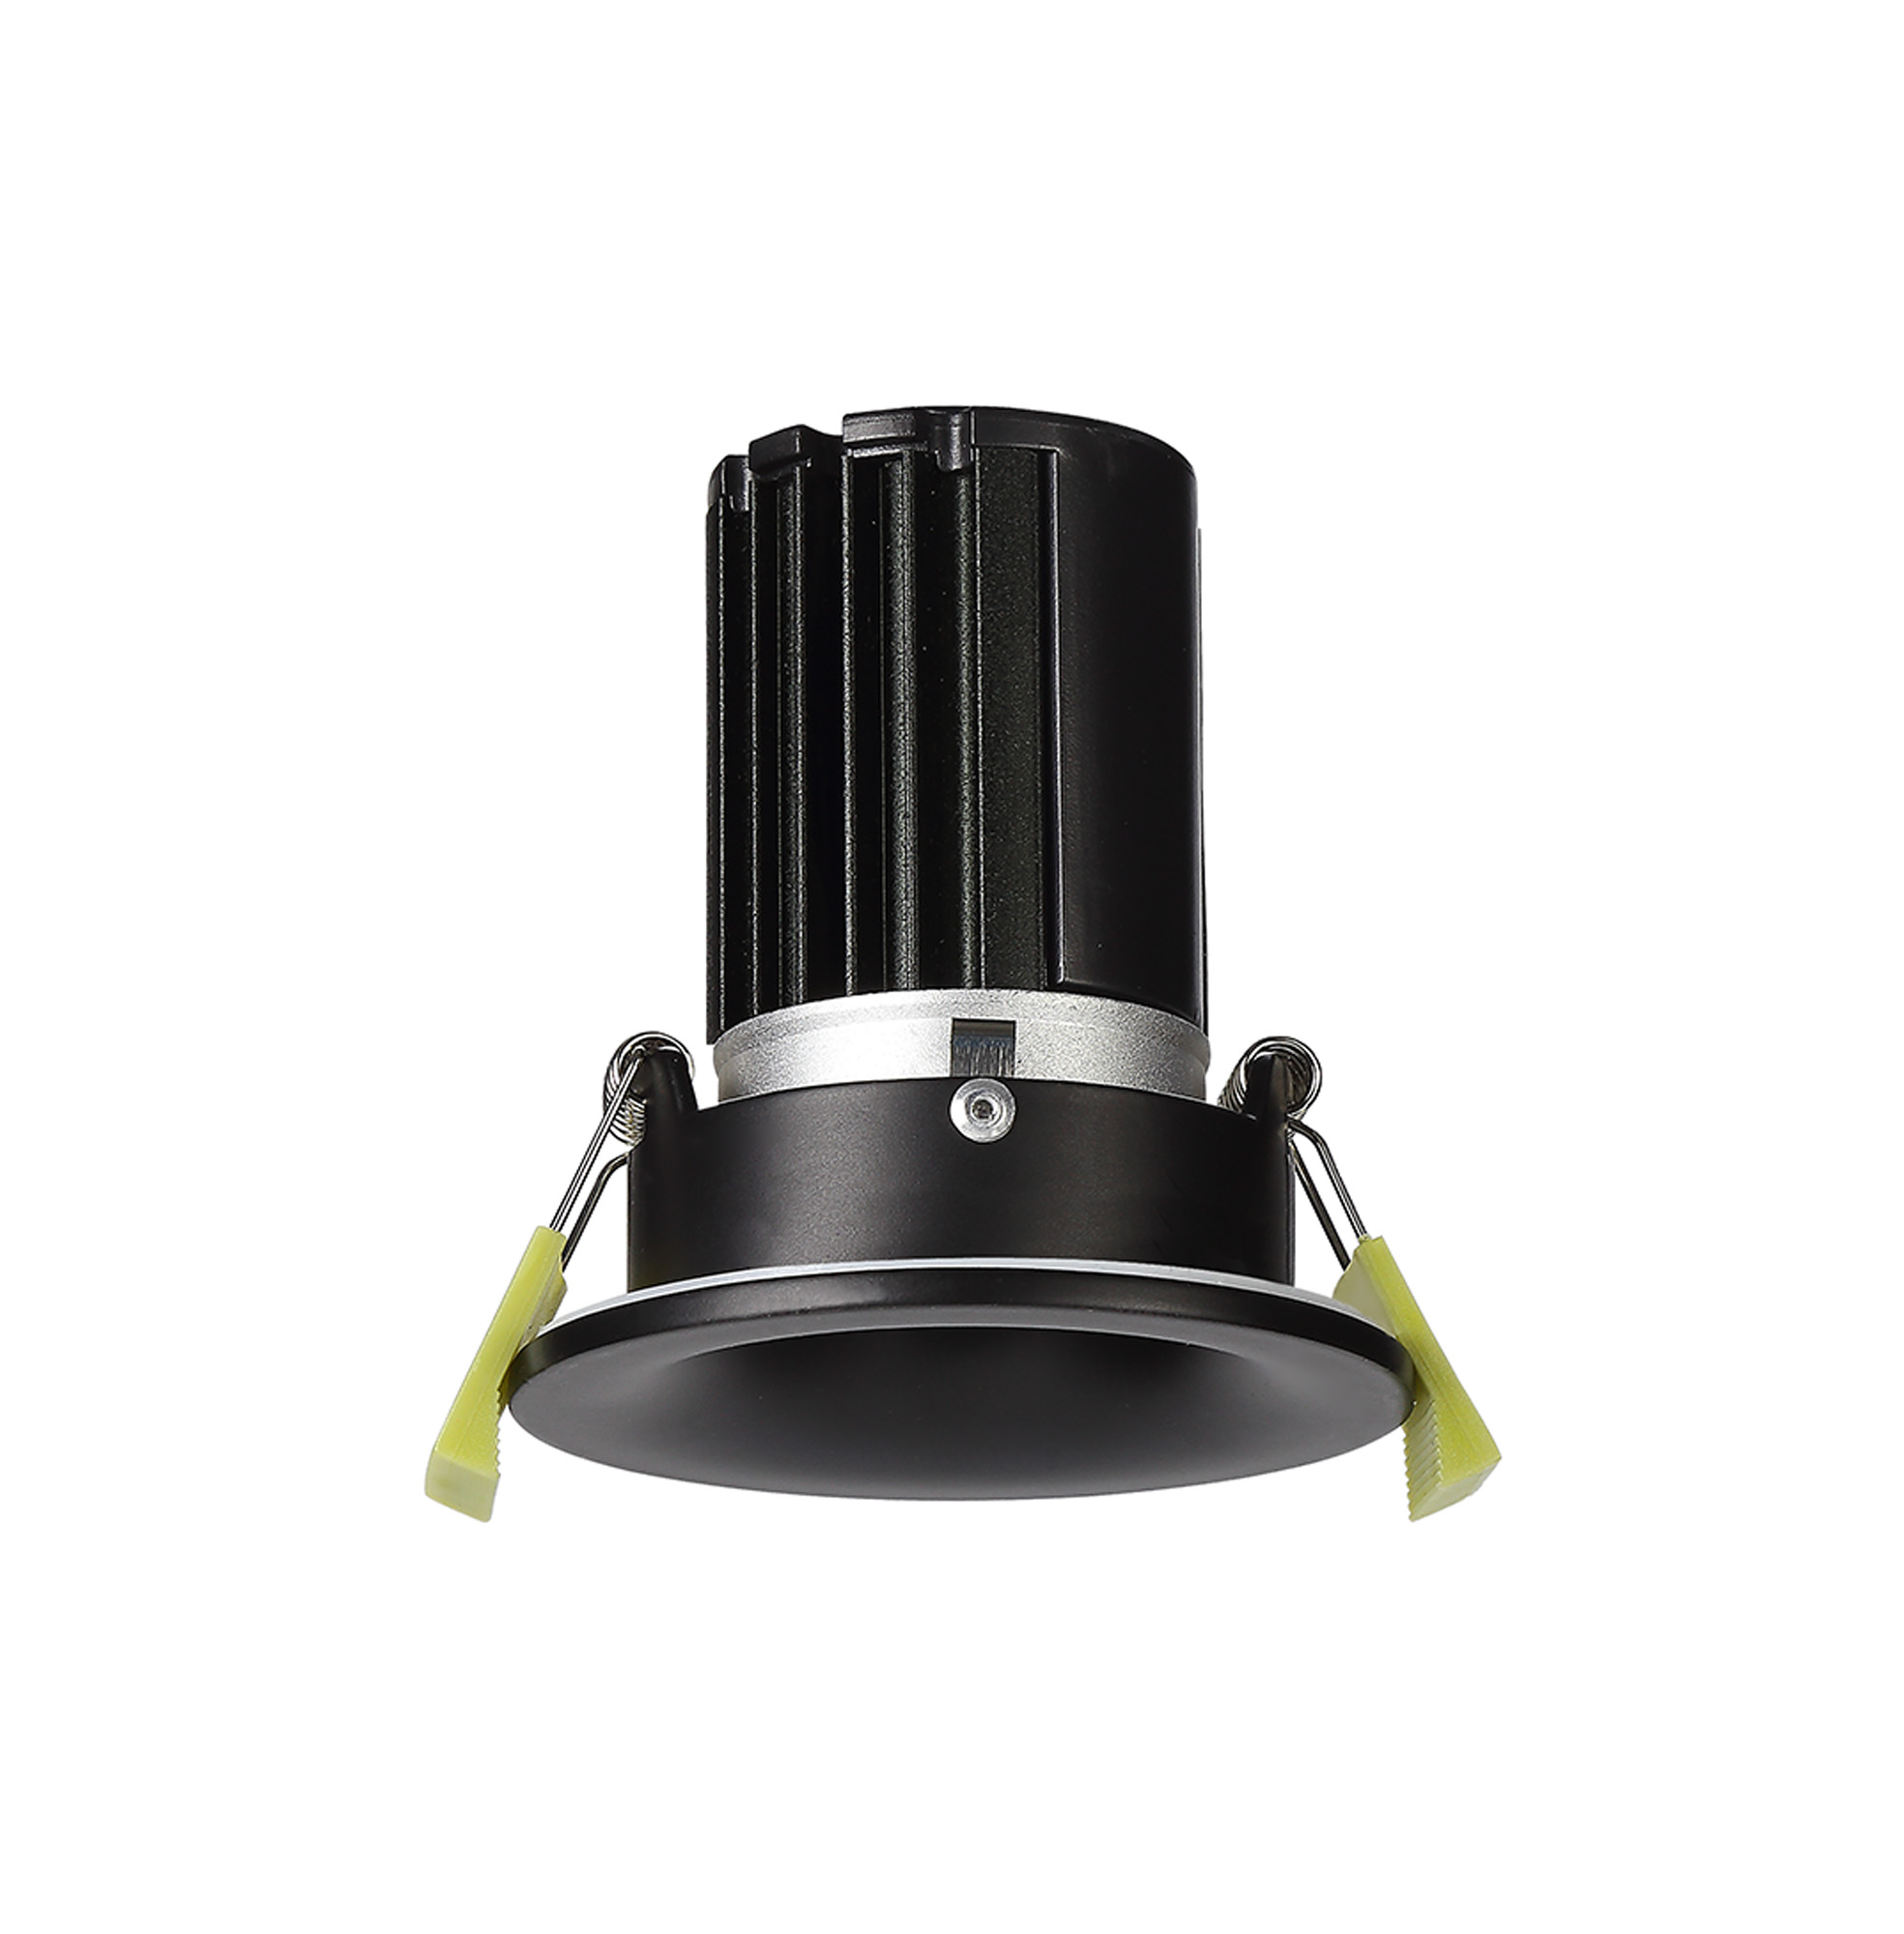 DM201530  Bruve 12 Tridonic powered 12W 2700K 1200lm 12° LED Engine;350mA ; CRI>90 LED Engine Matt Black Fixed Round Recessed Downlight; Inner Glass cover; IP65